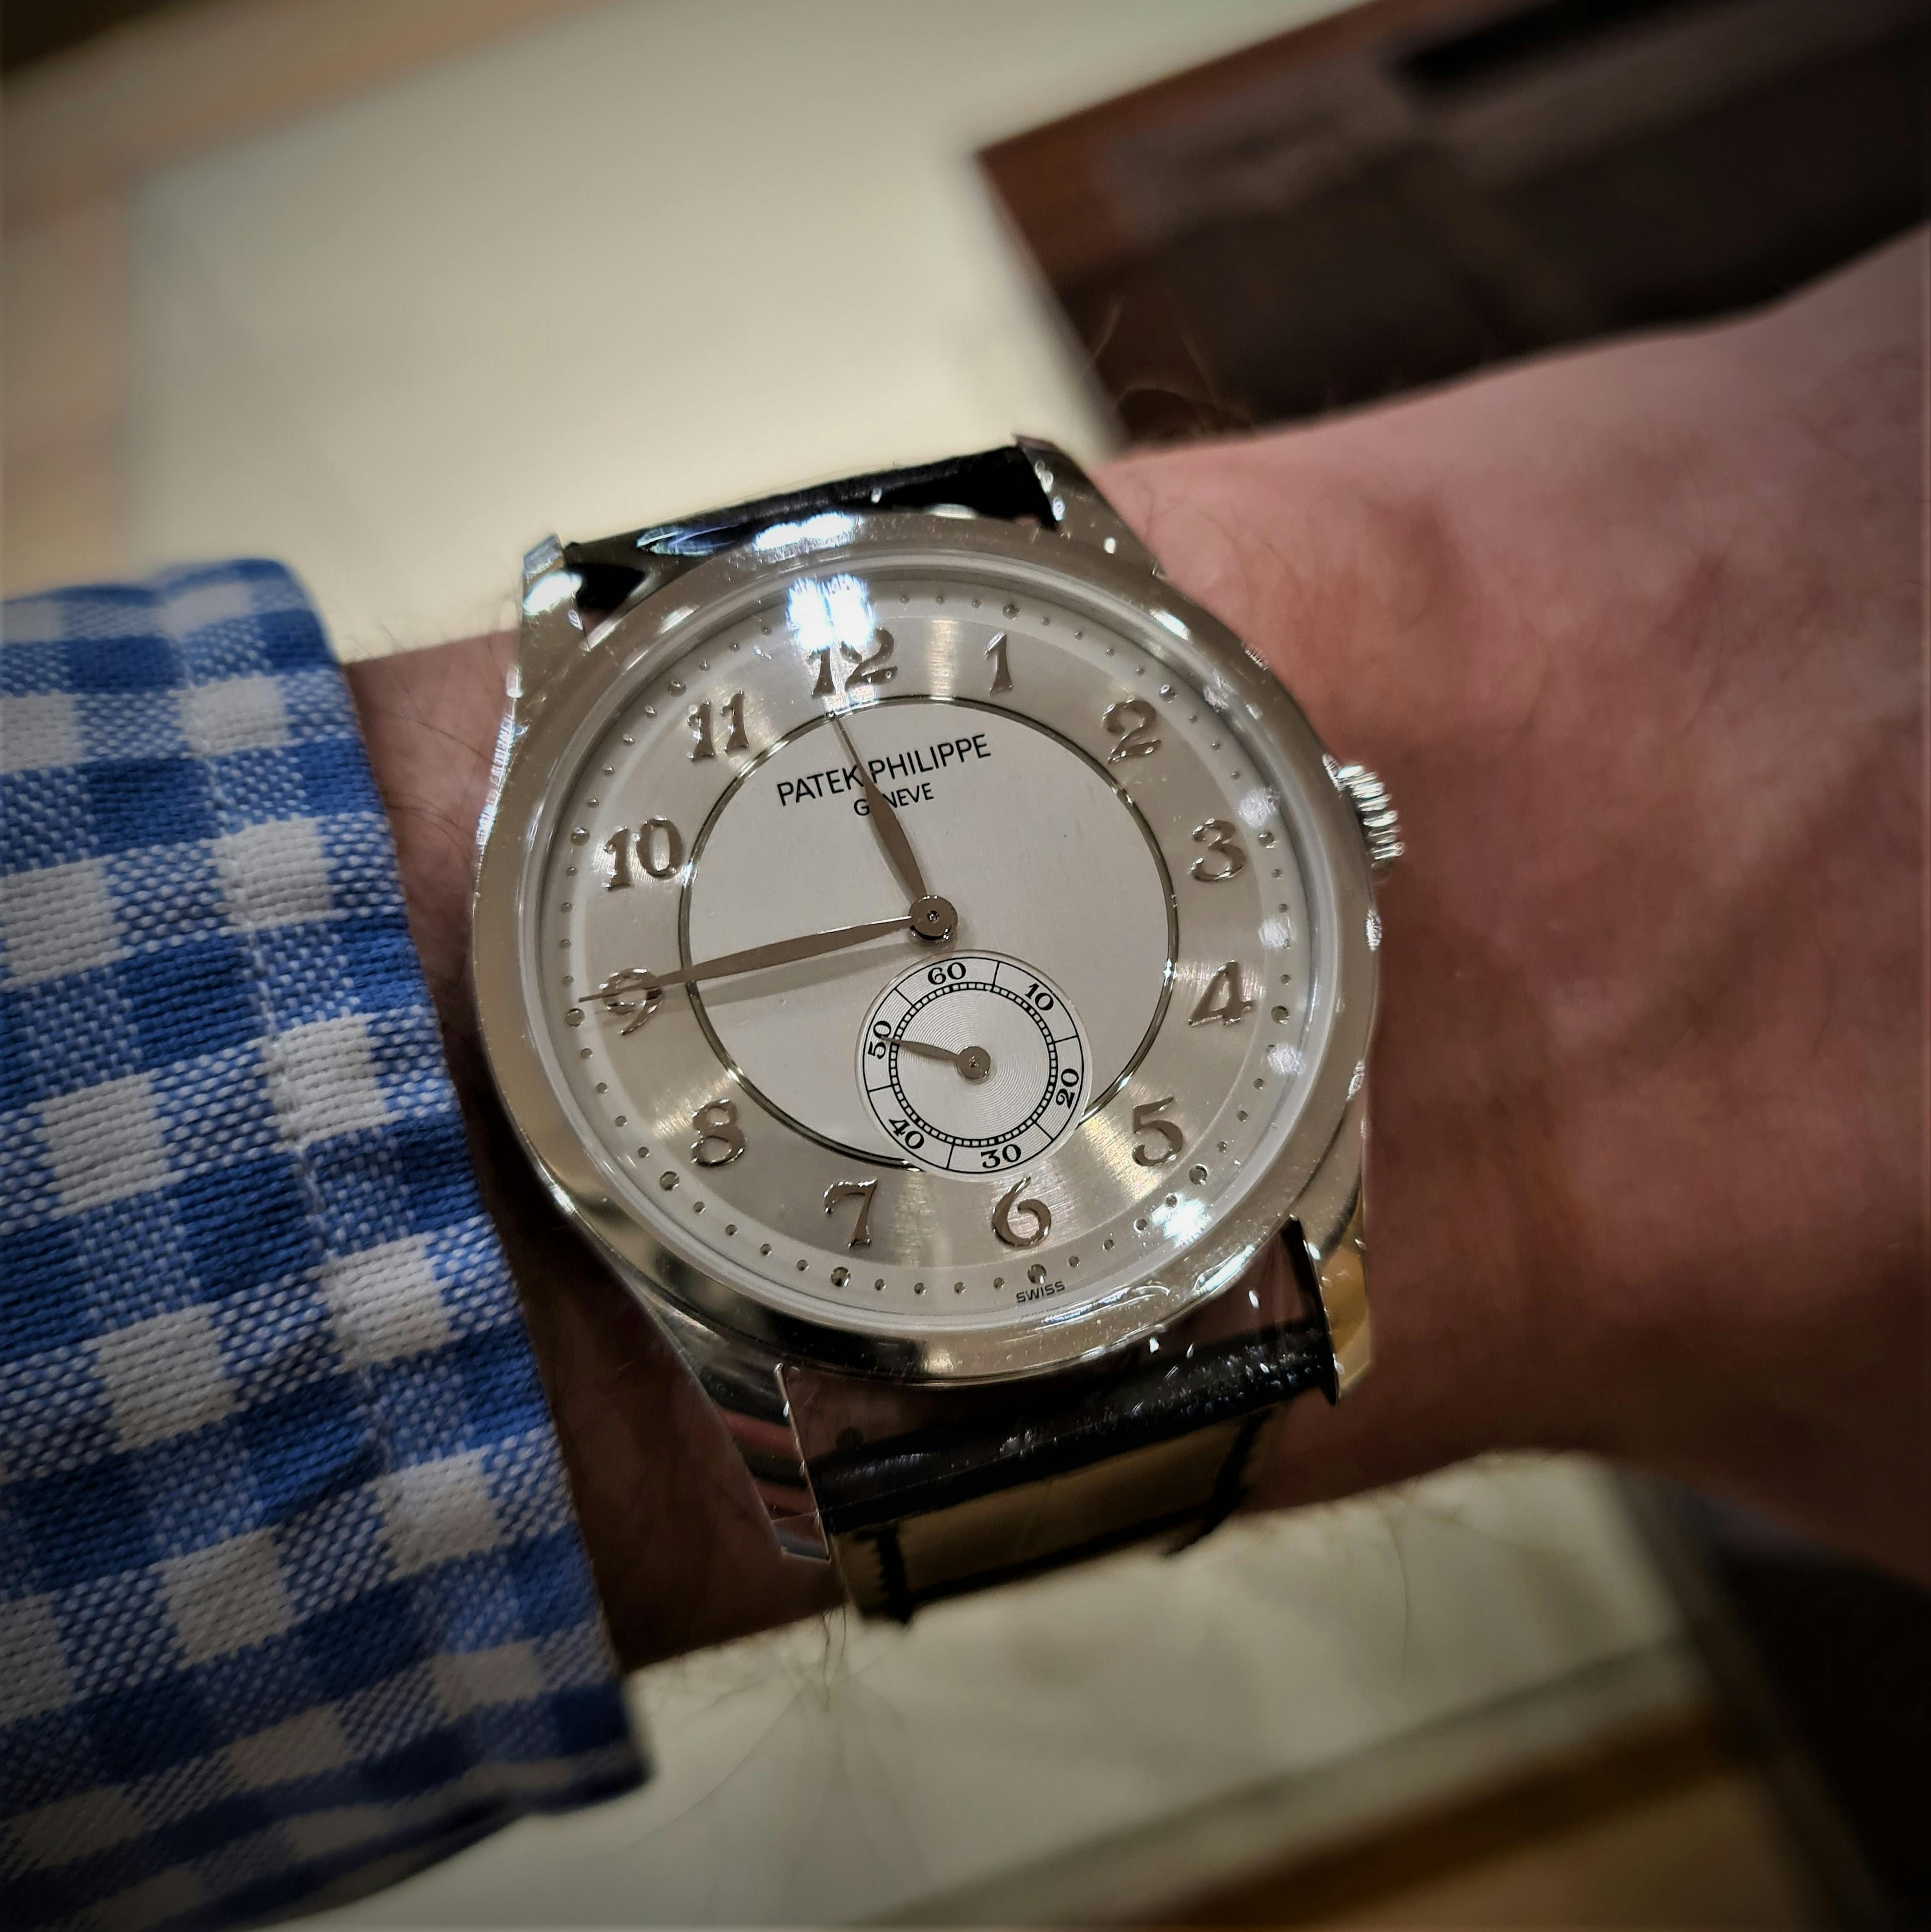 This modern watch from Patek Philippe contains the famous Breguet Numerals Louis Breguet designed.